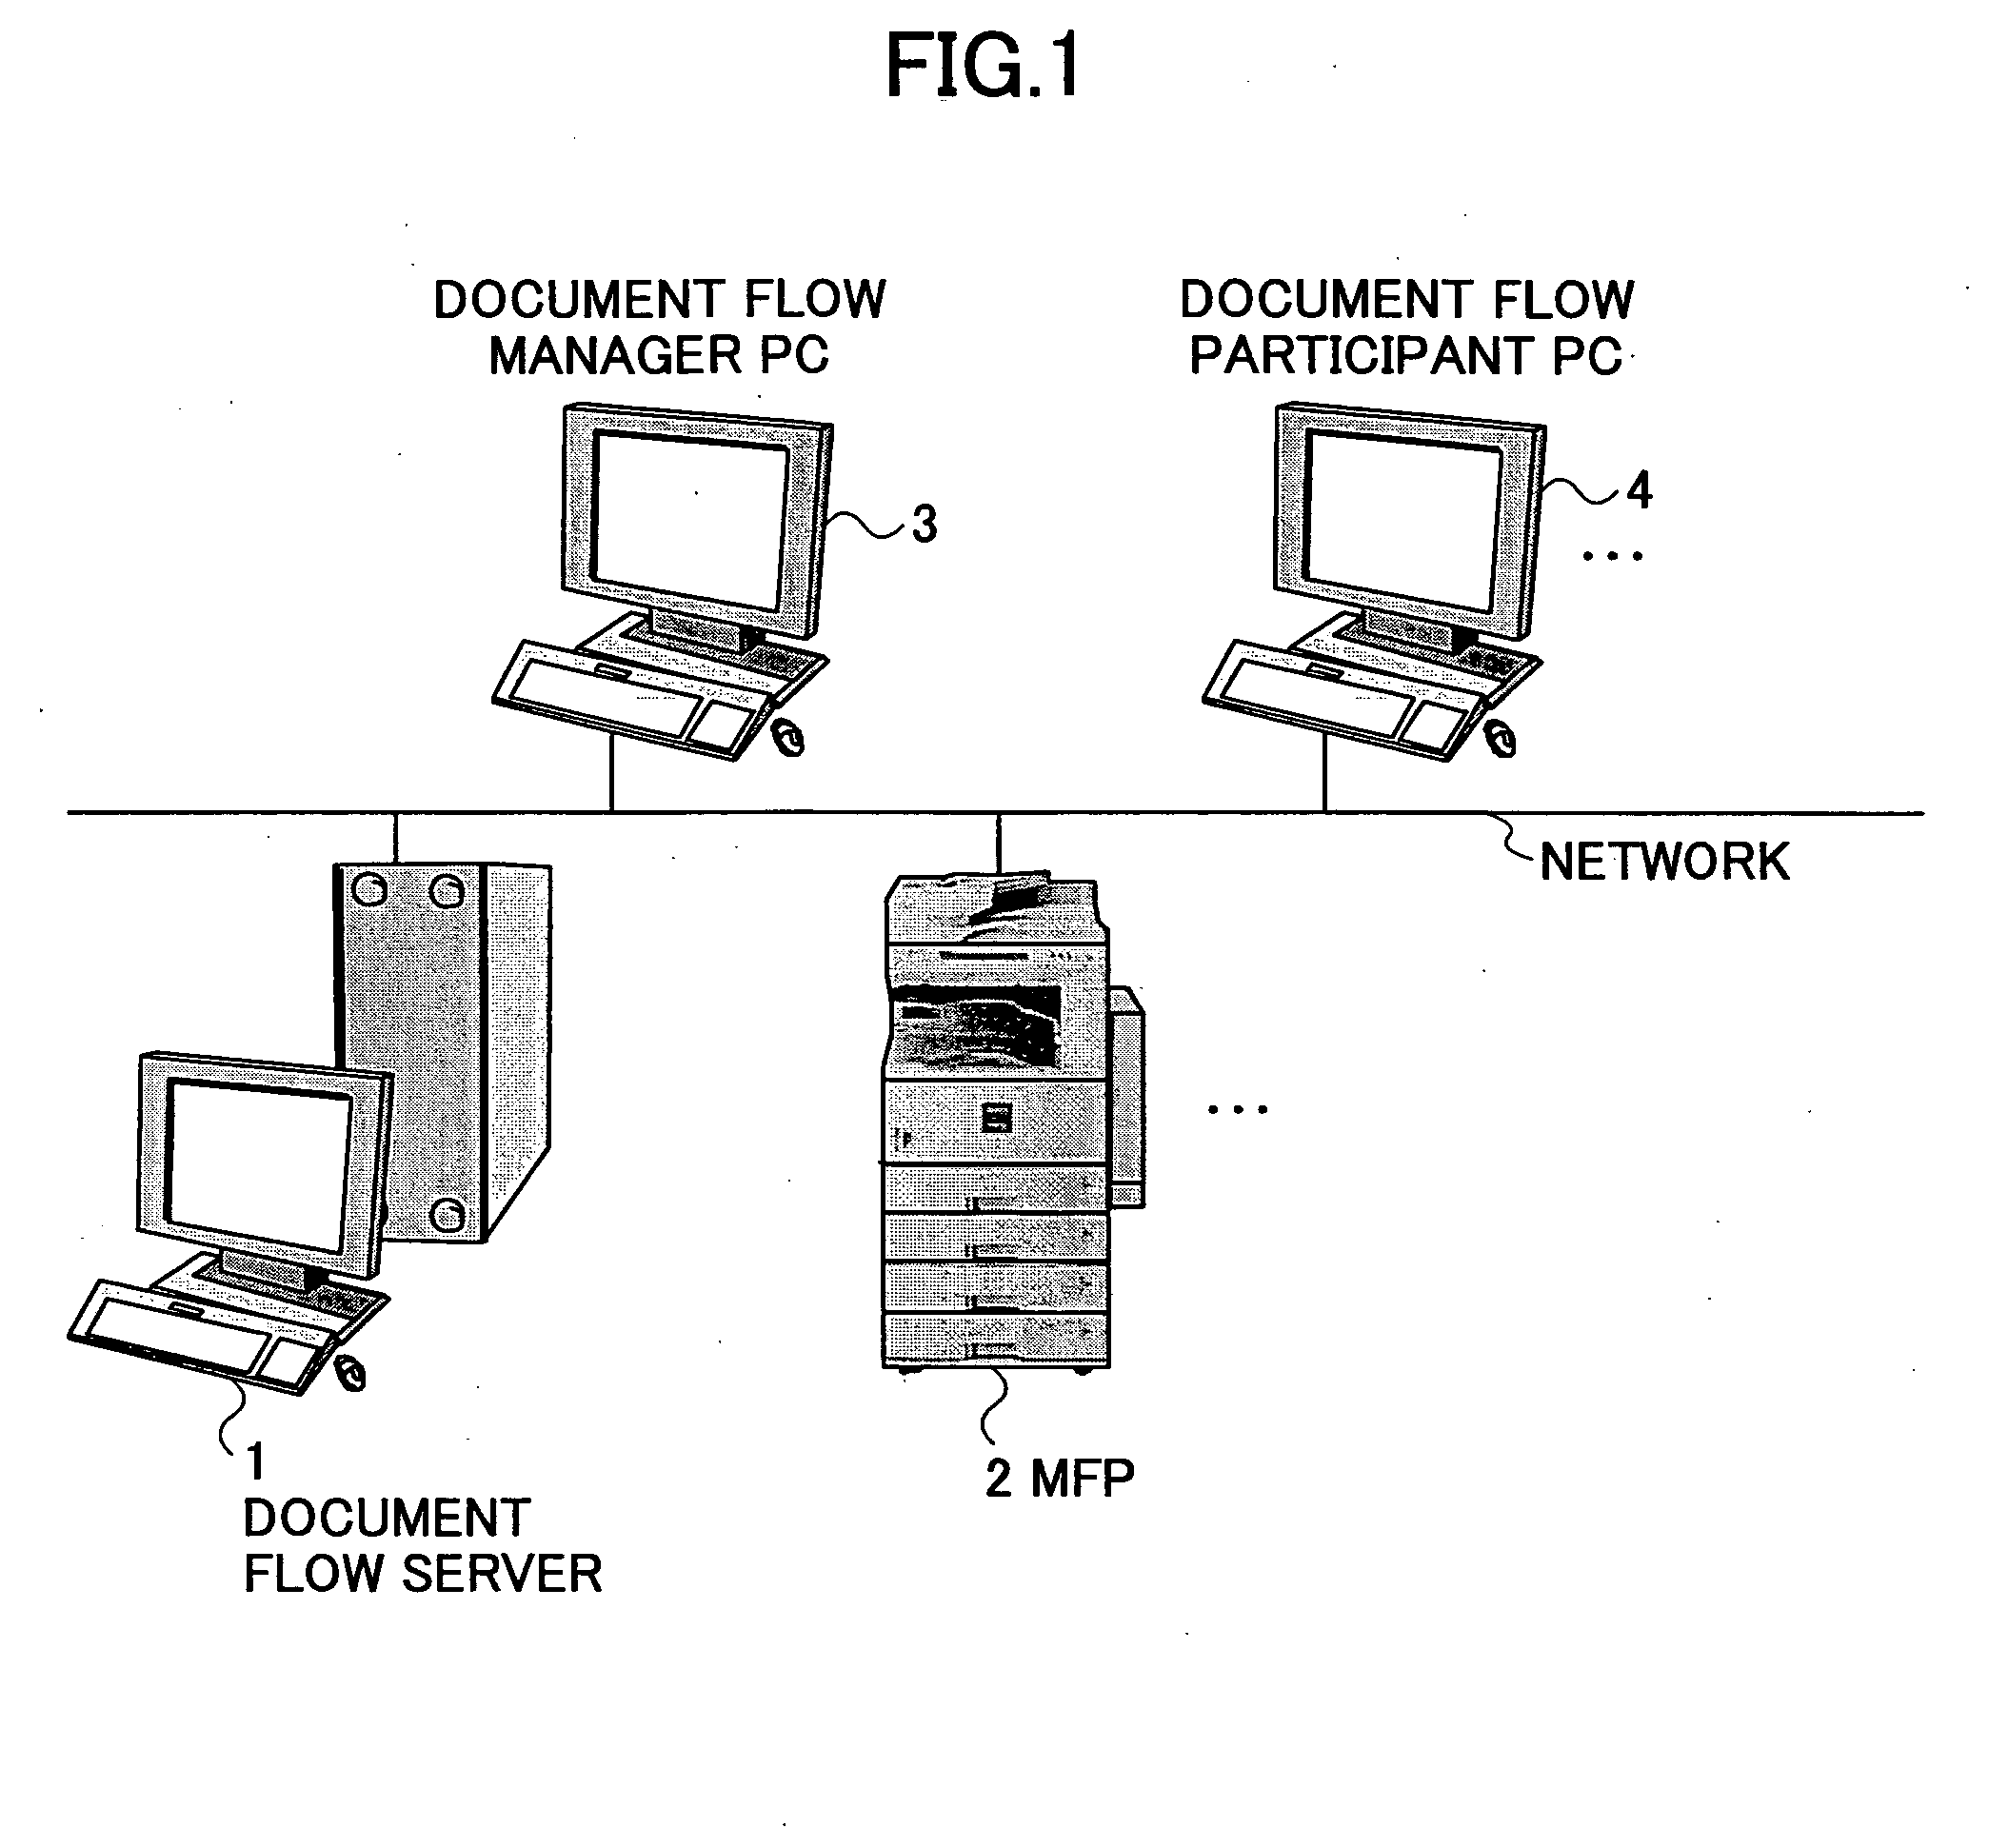 Workflow management apparatus and method